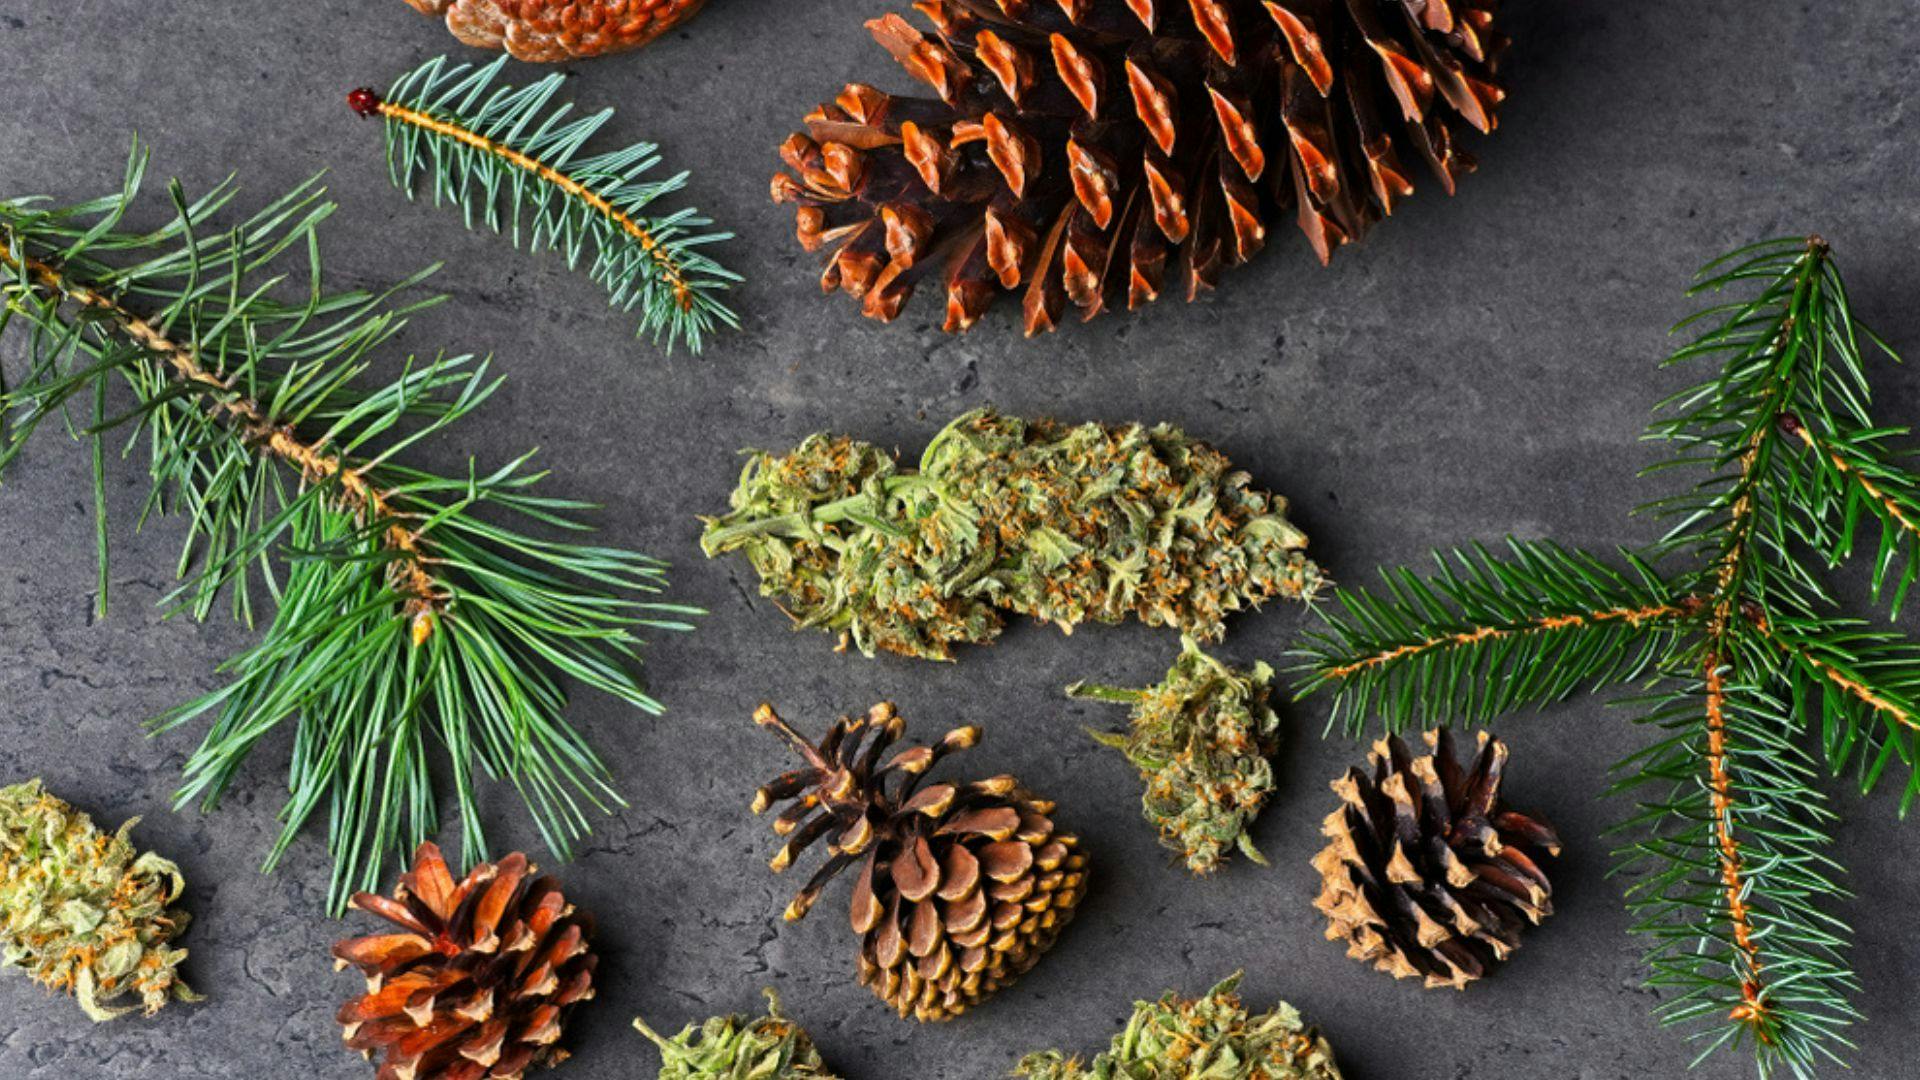 a photo of pinecones, pine leaves and cannabis nugs.